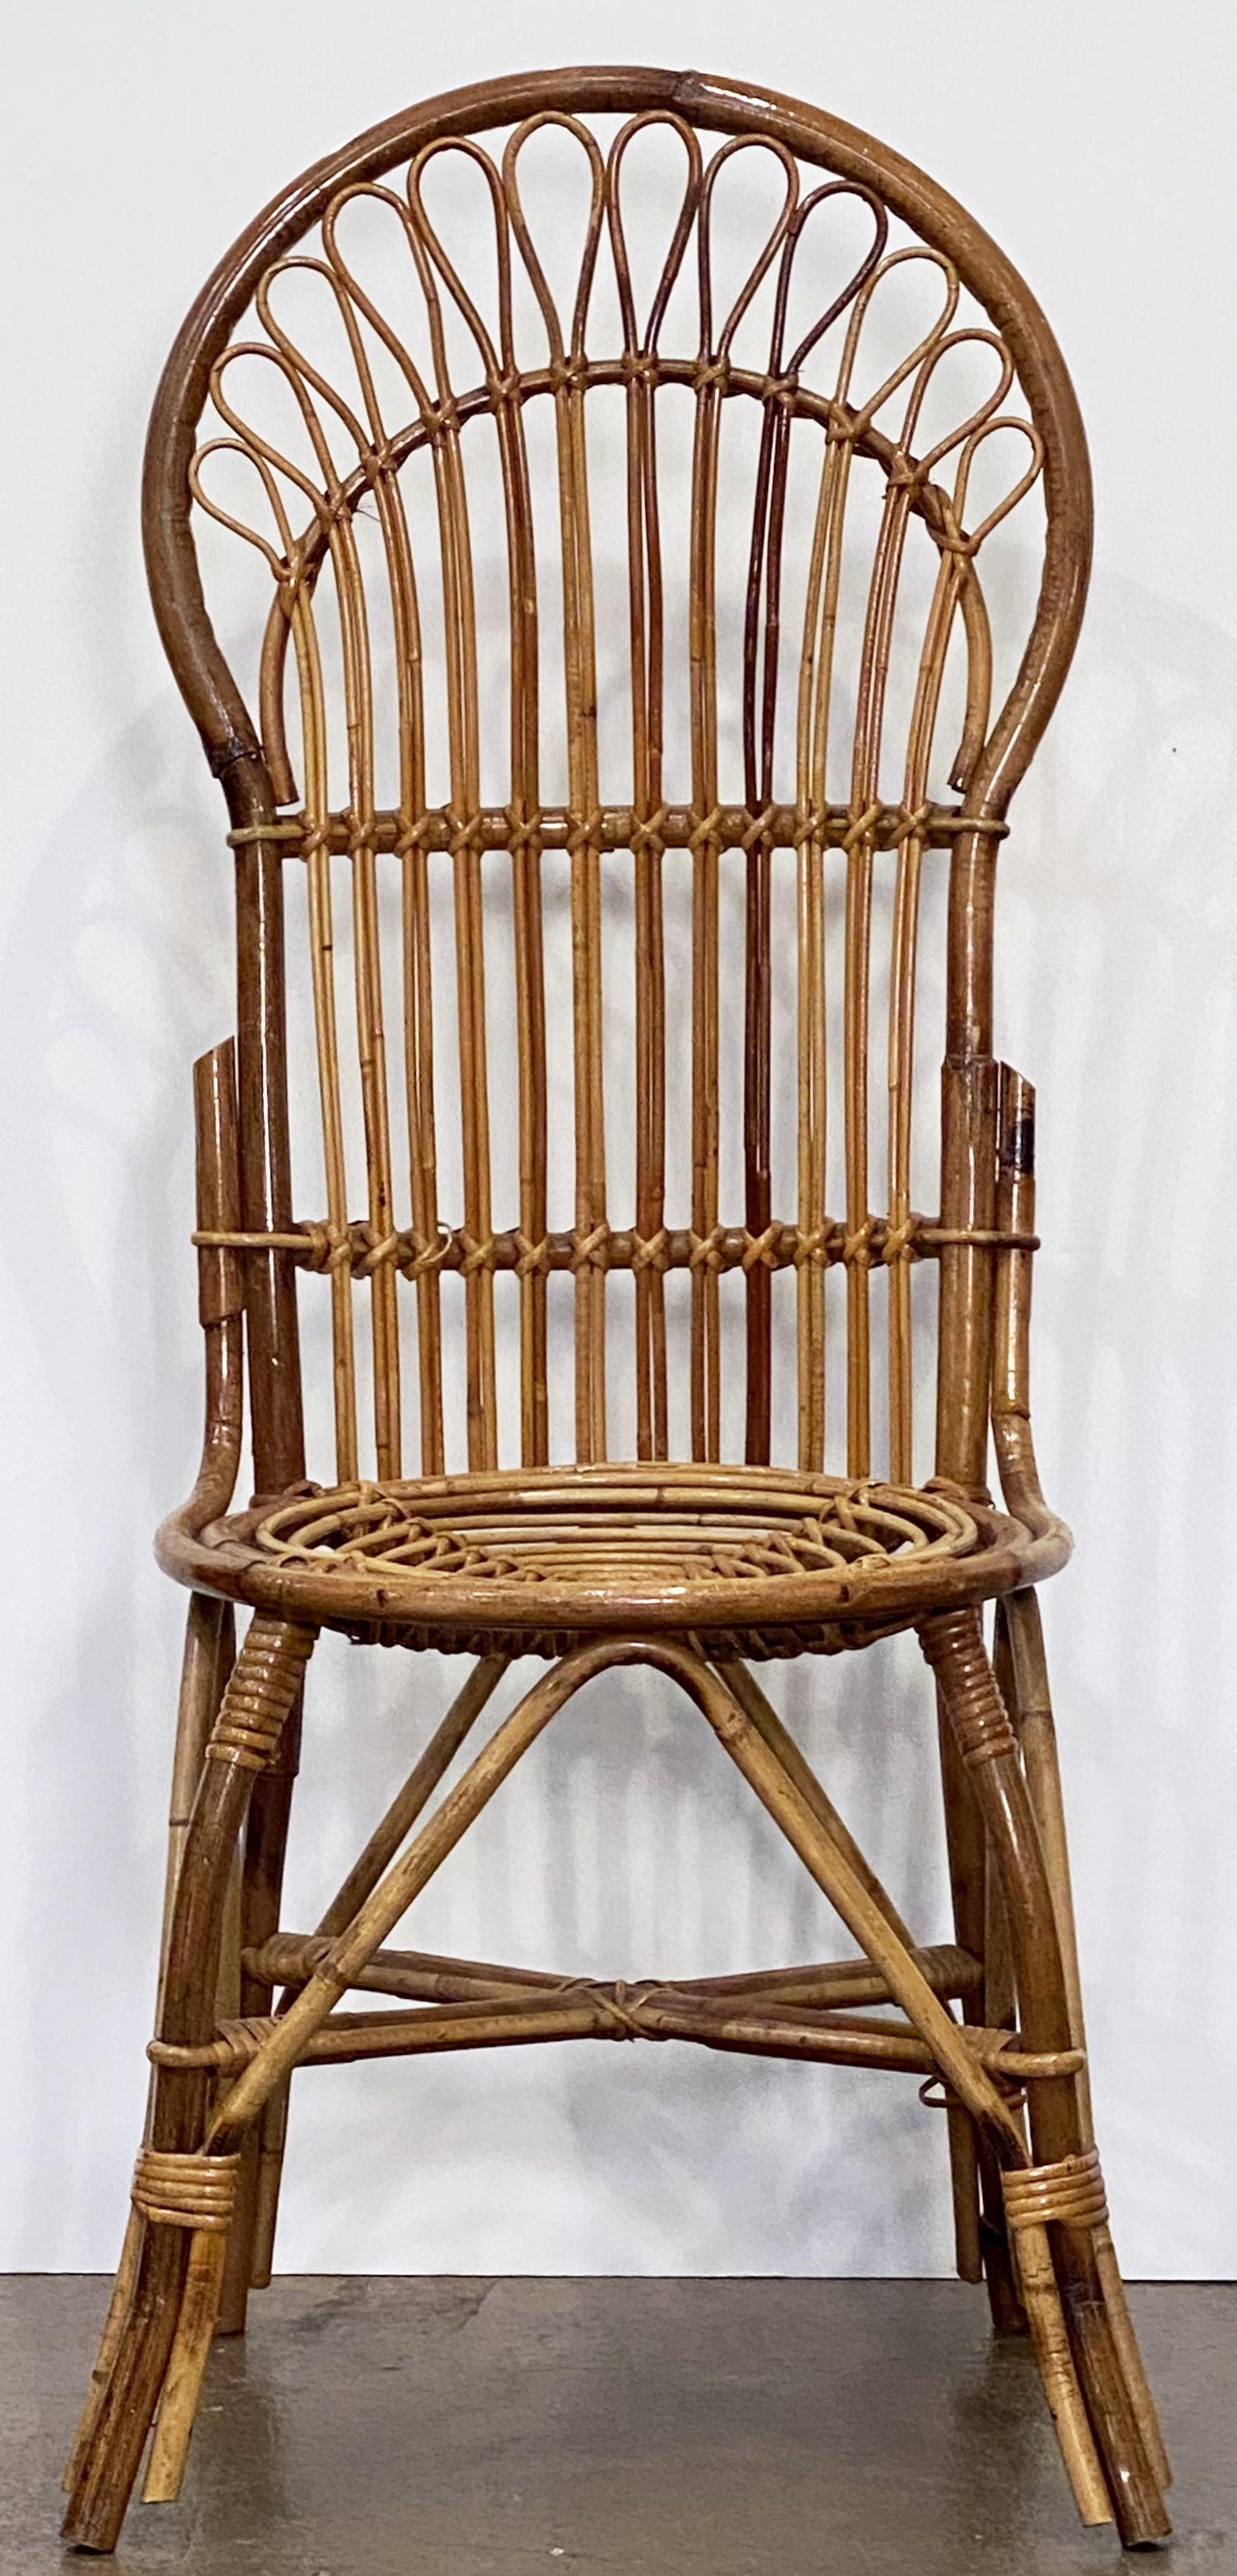 A fine vintage Italian fan-backed chair from the Mid-20th century of woven rattan and bamboo featuring a stylish design to the back, seat, and legs.

Two available.